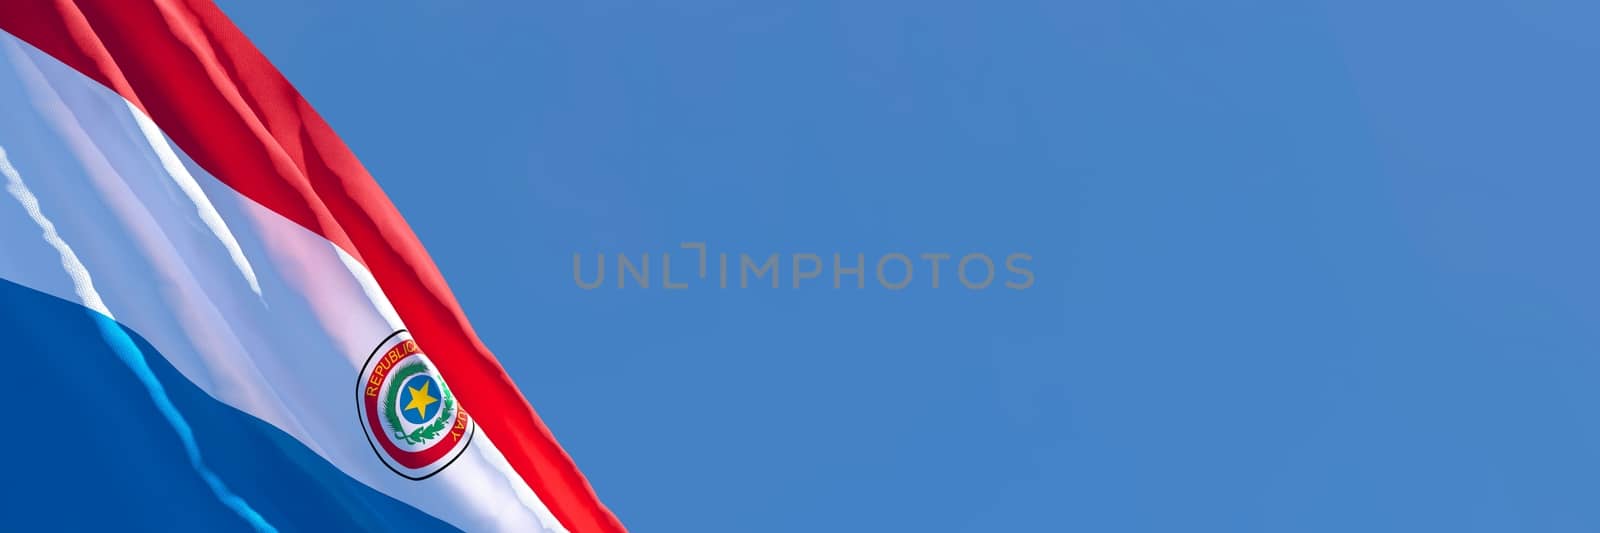 3D rendering of the national flag of Paraguay waving in the wind against a blue sky